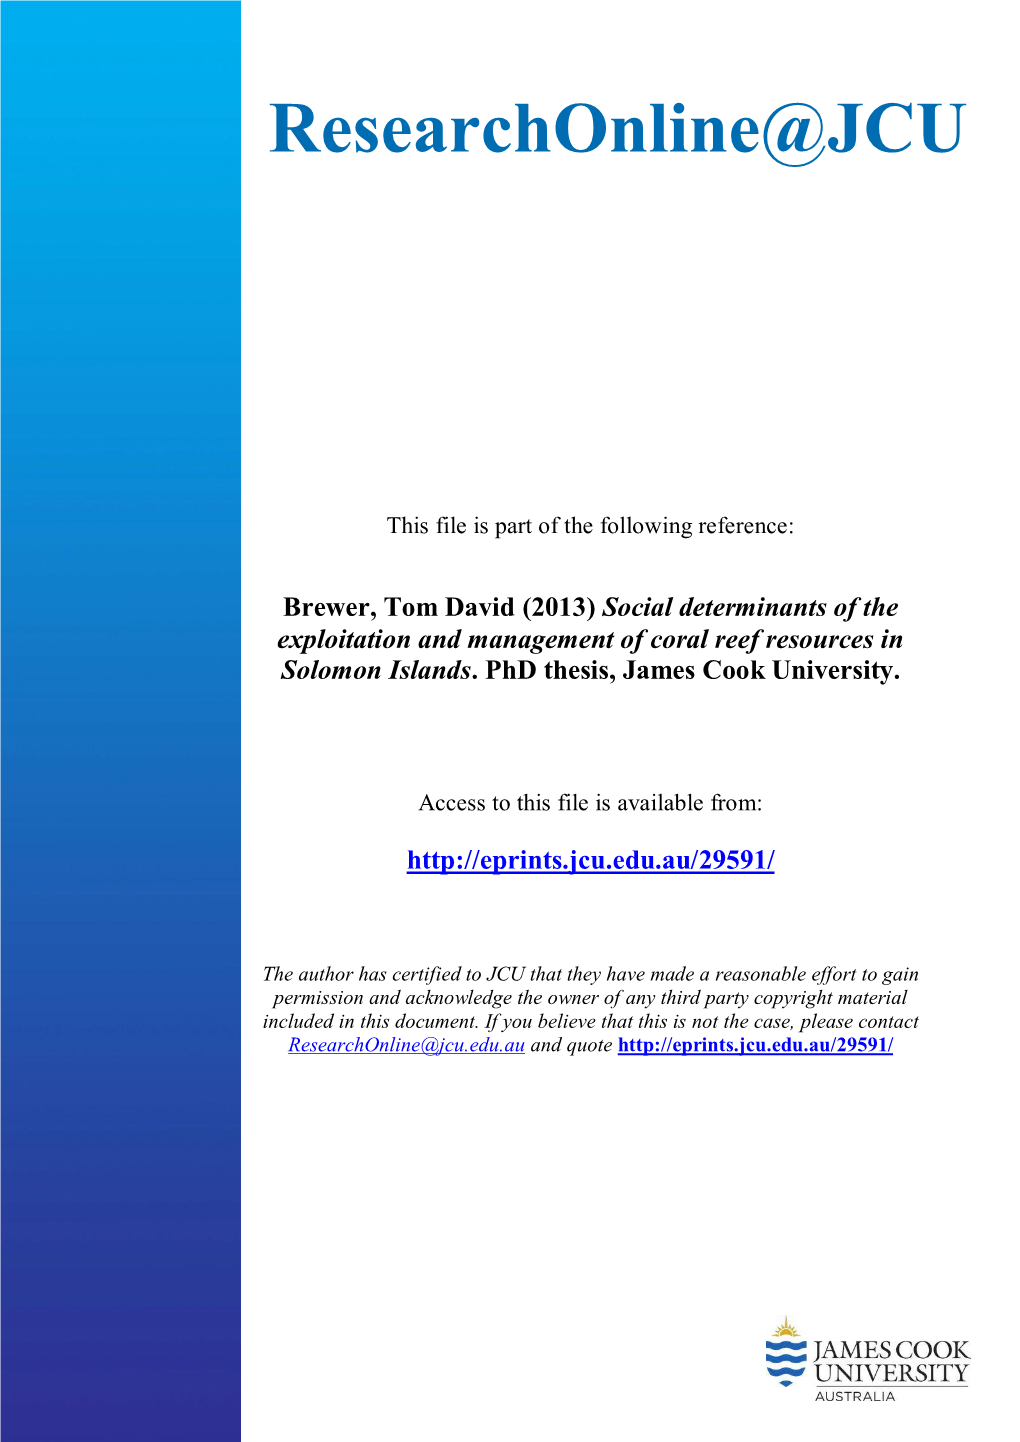 Social Determinants of the Exploitation and Management of Coral Reef Resources in Solomon Islands